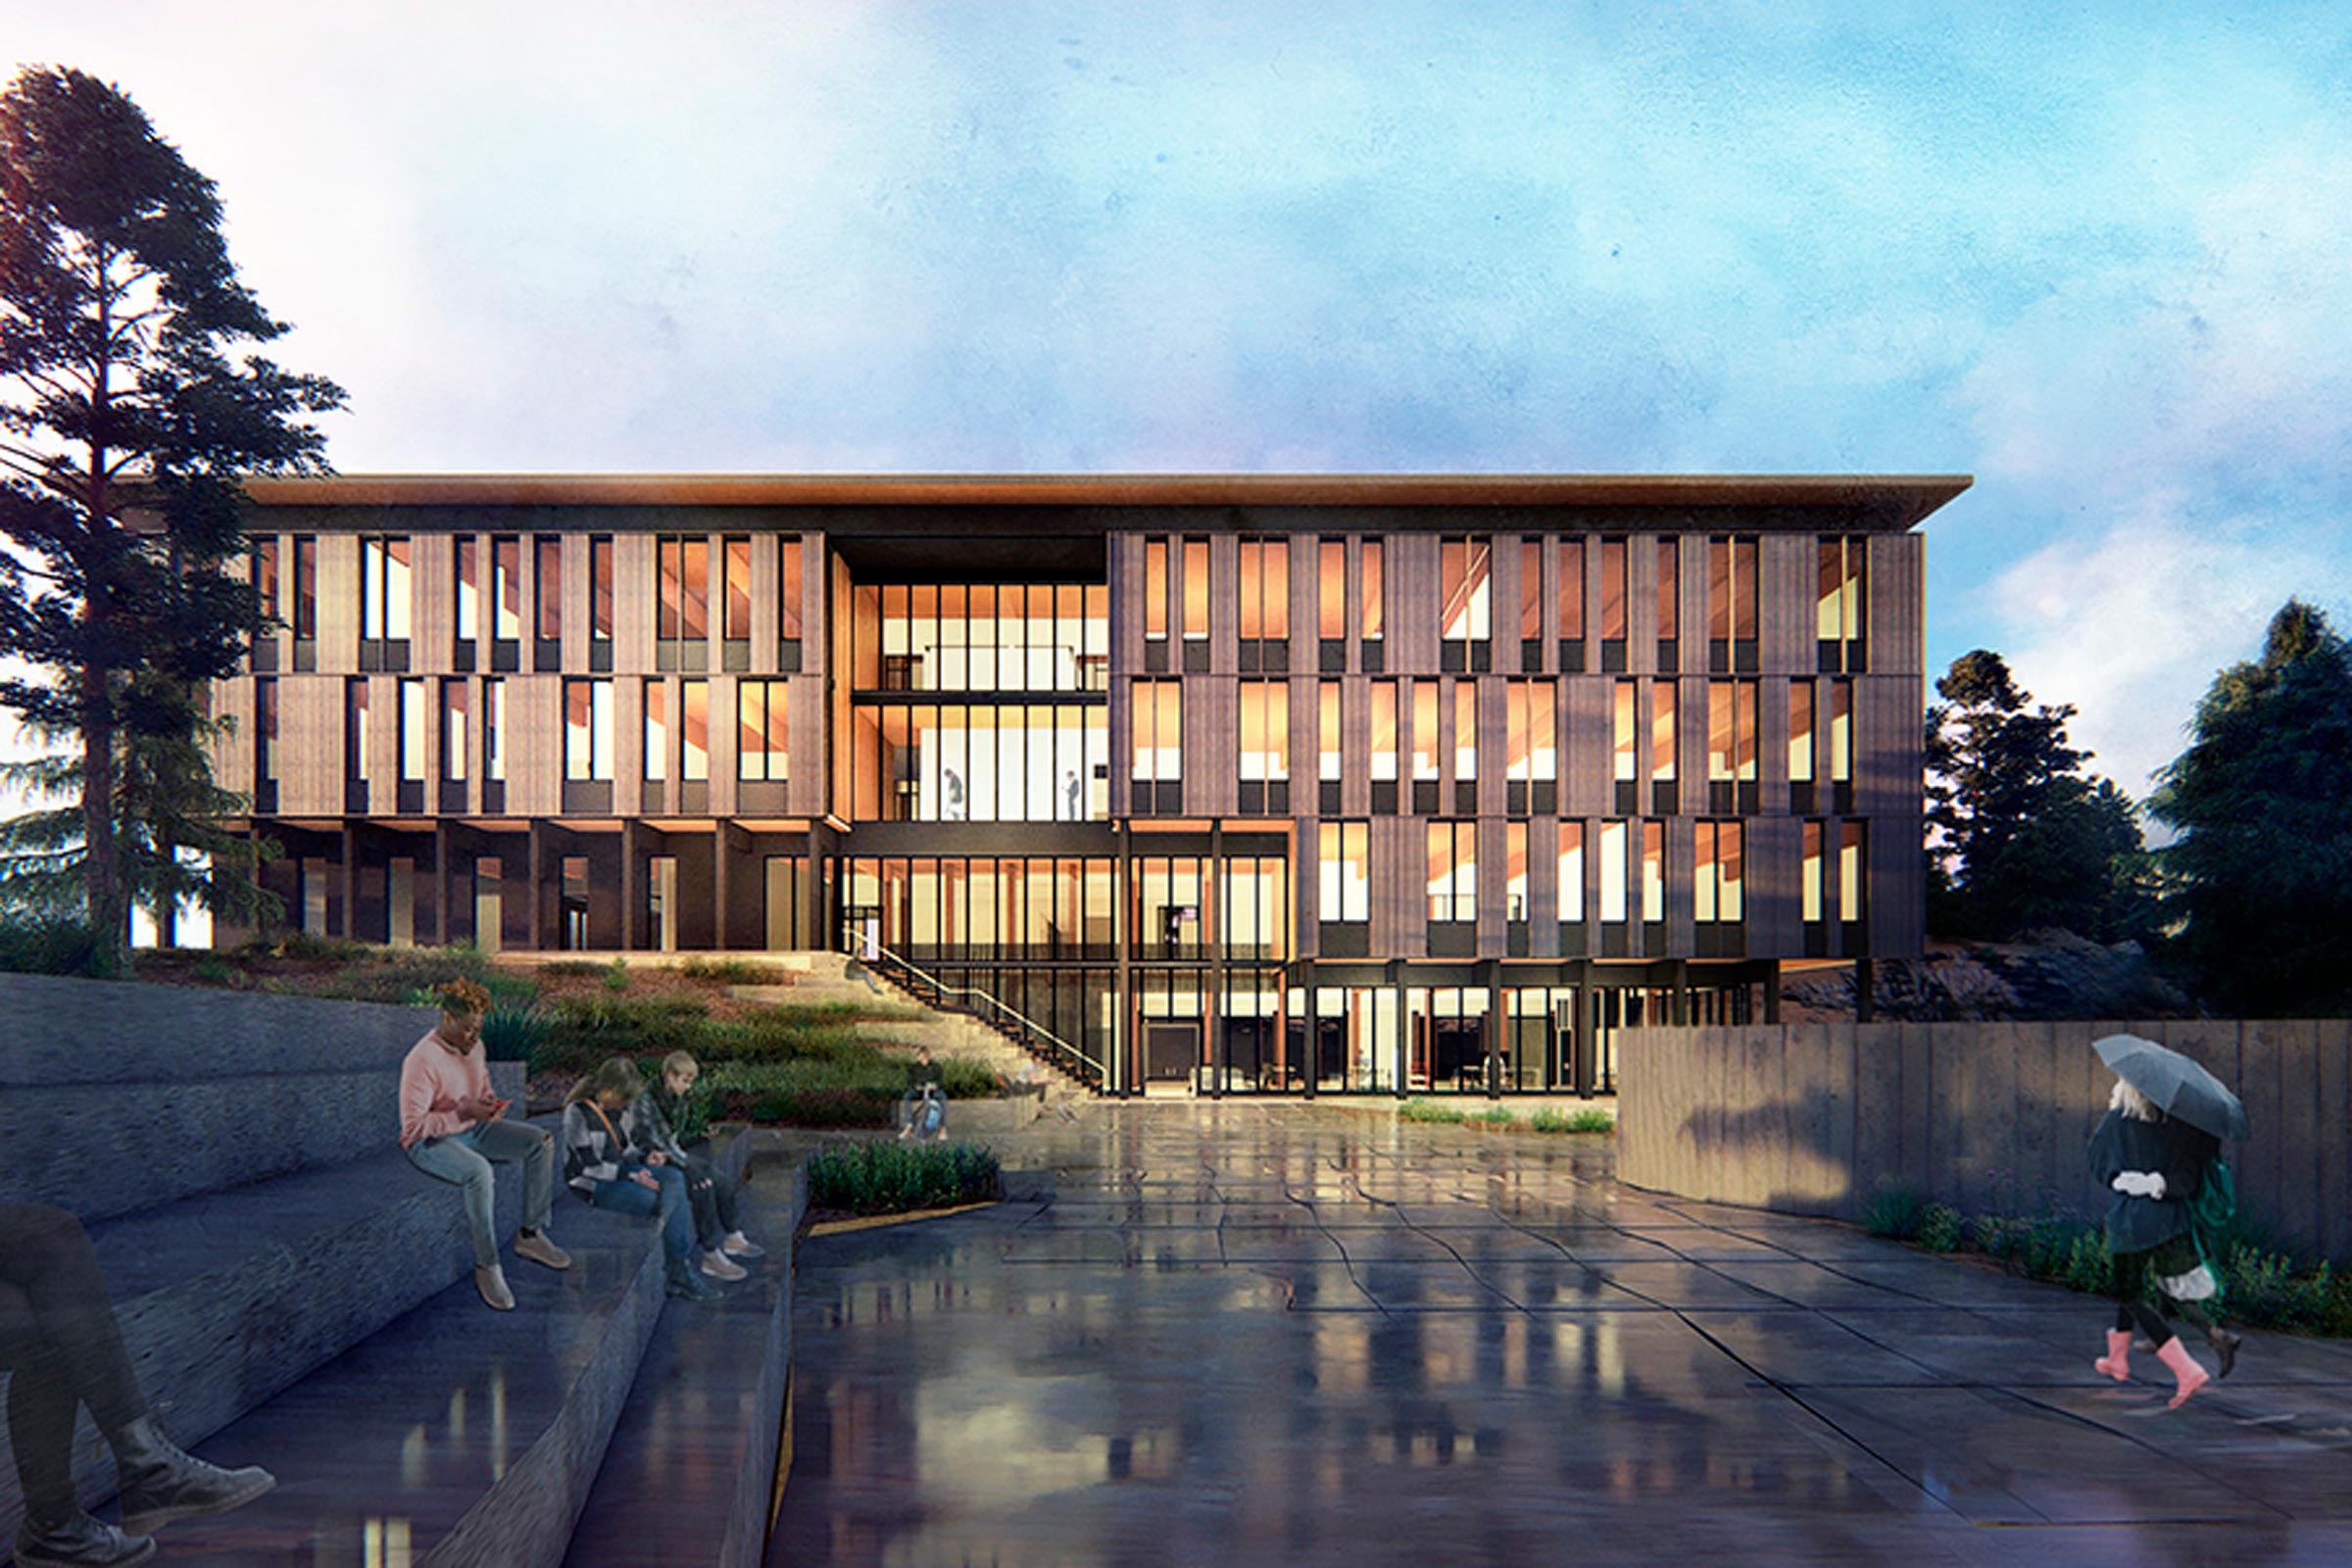 Mass Timber and Net-Zero Design for Higher Education and Lab Buildings